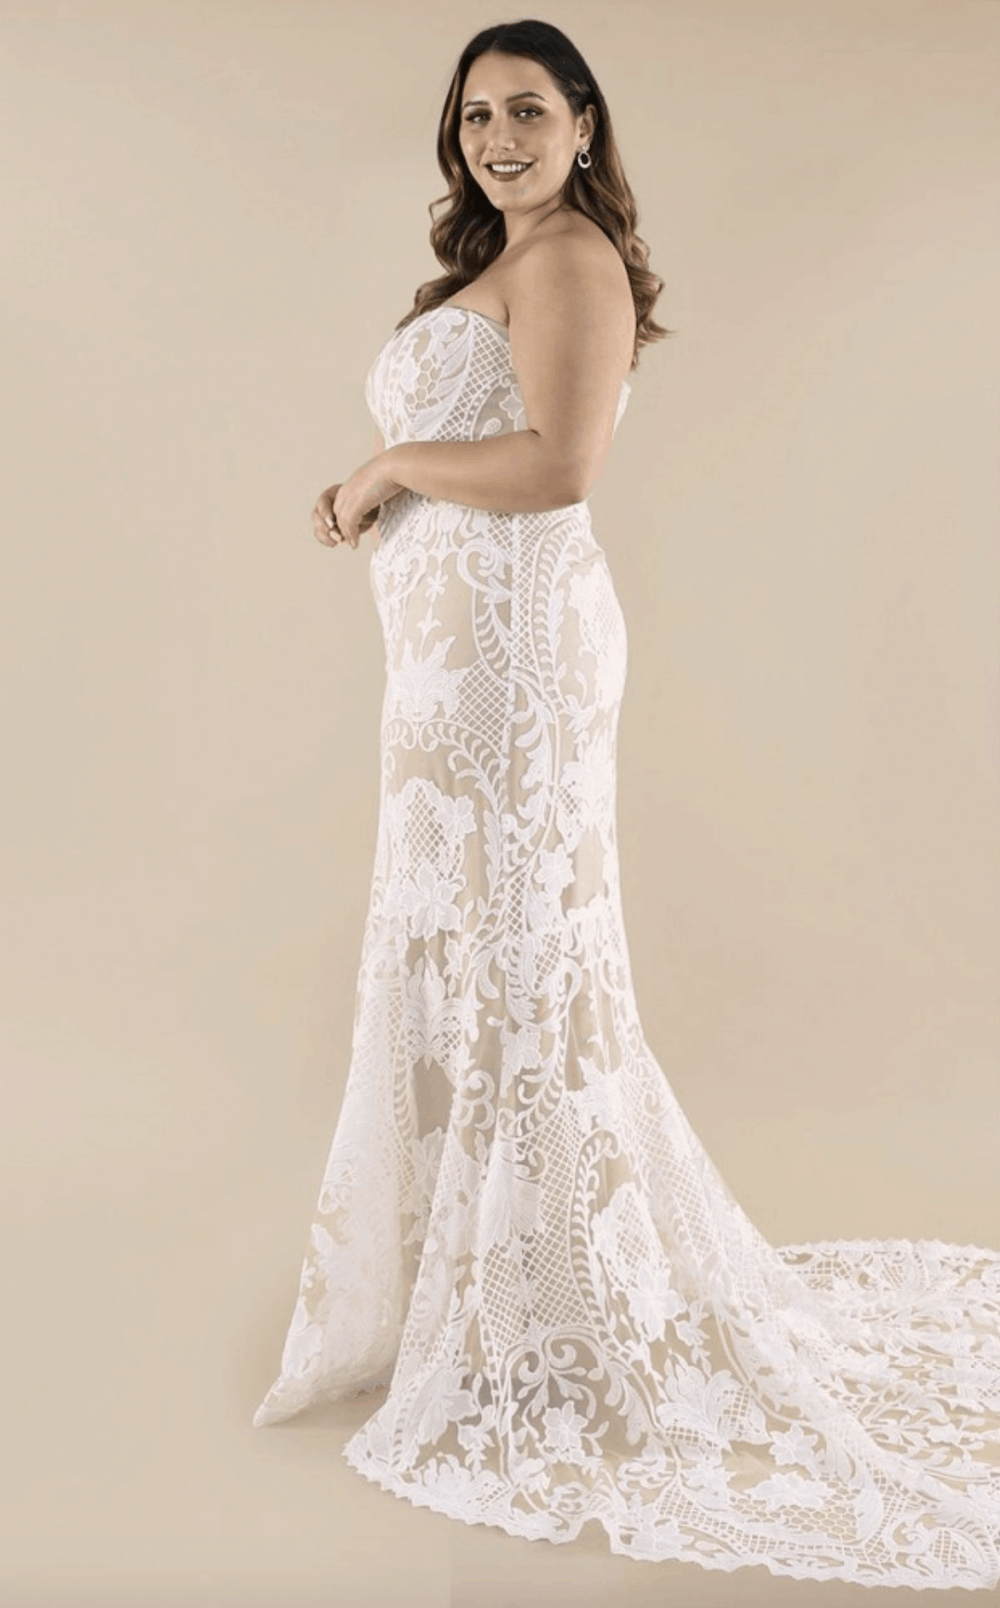 Plus Size Bridal Gowns and Wedding Dresses Perfect for Curvy Brides Embroidered Lace Overlay Long Train